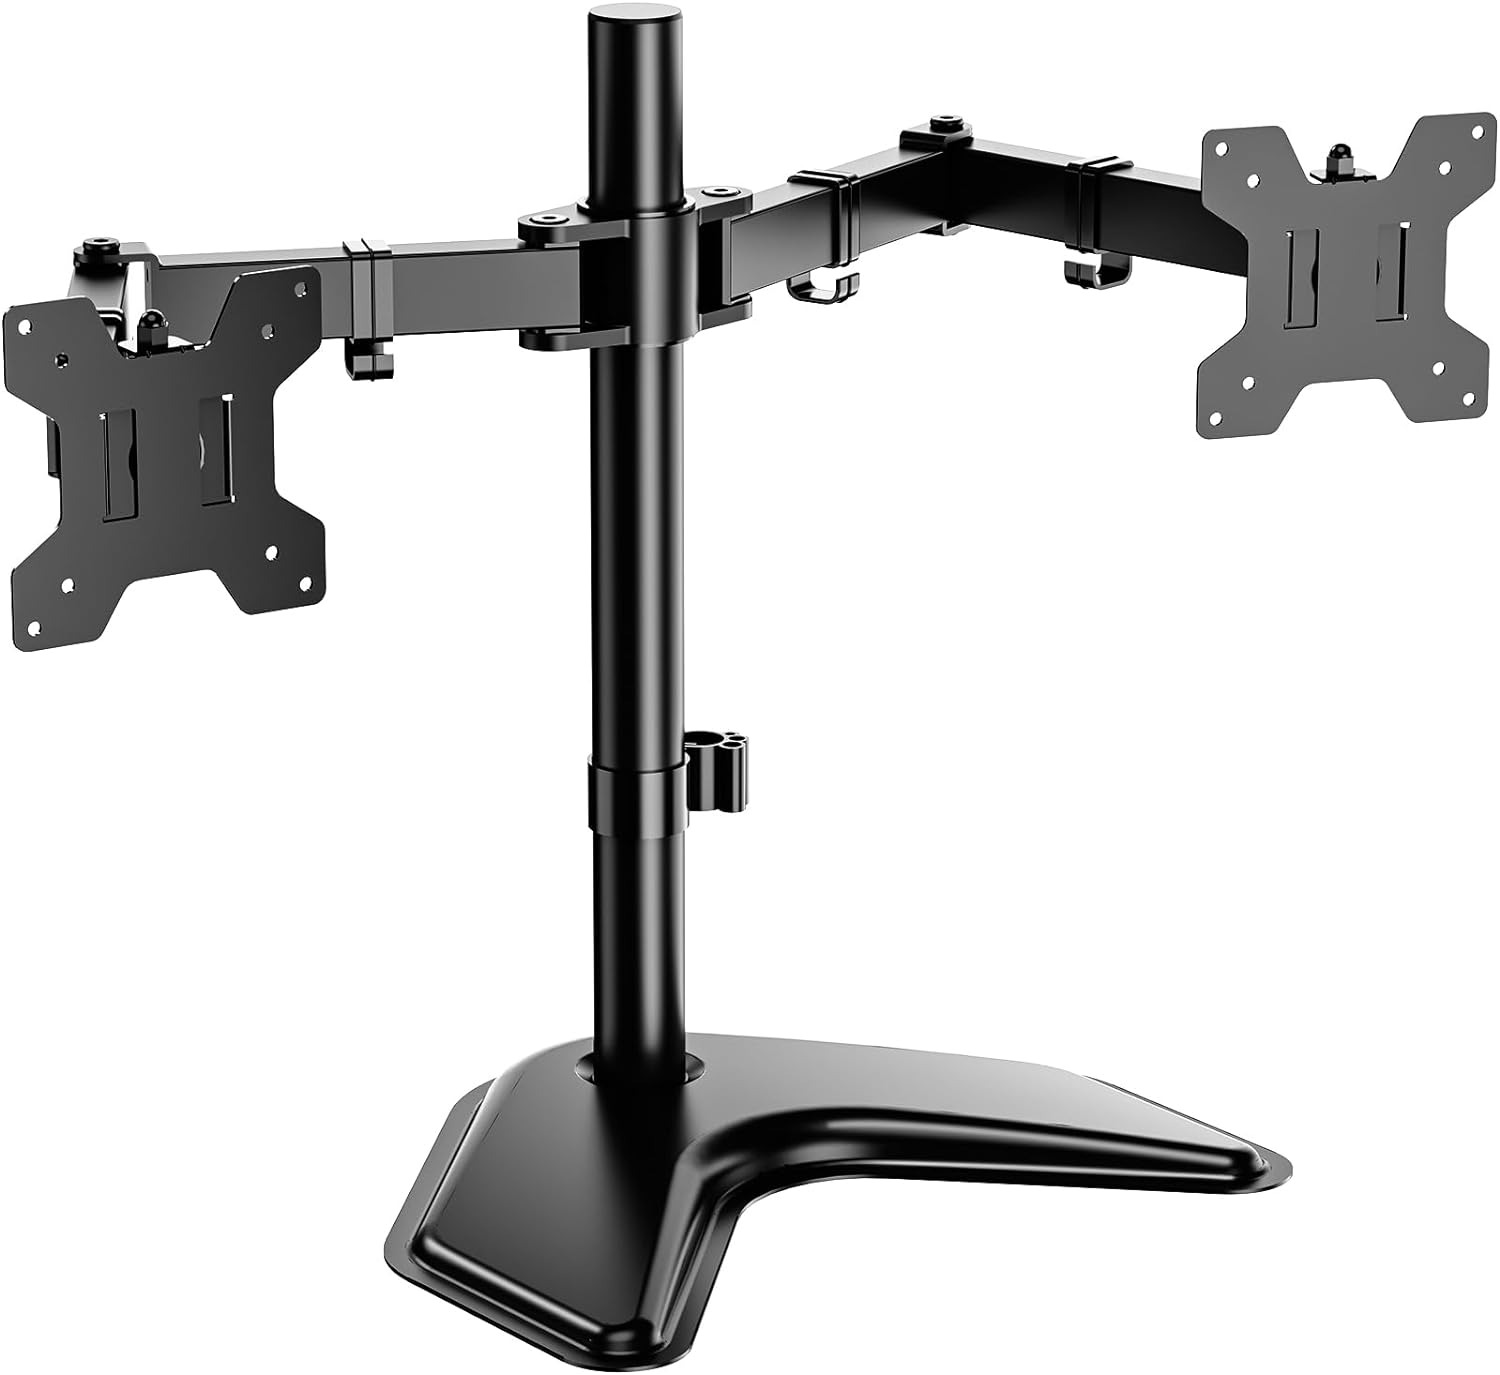 WALI Dual Monitor Stand for Desk, Computer Monitor Stands for 2 Monitors up To